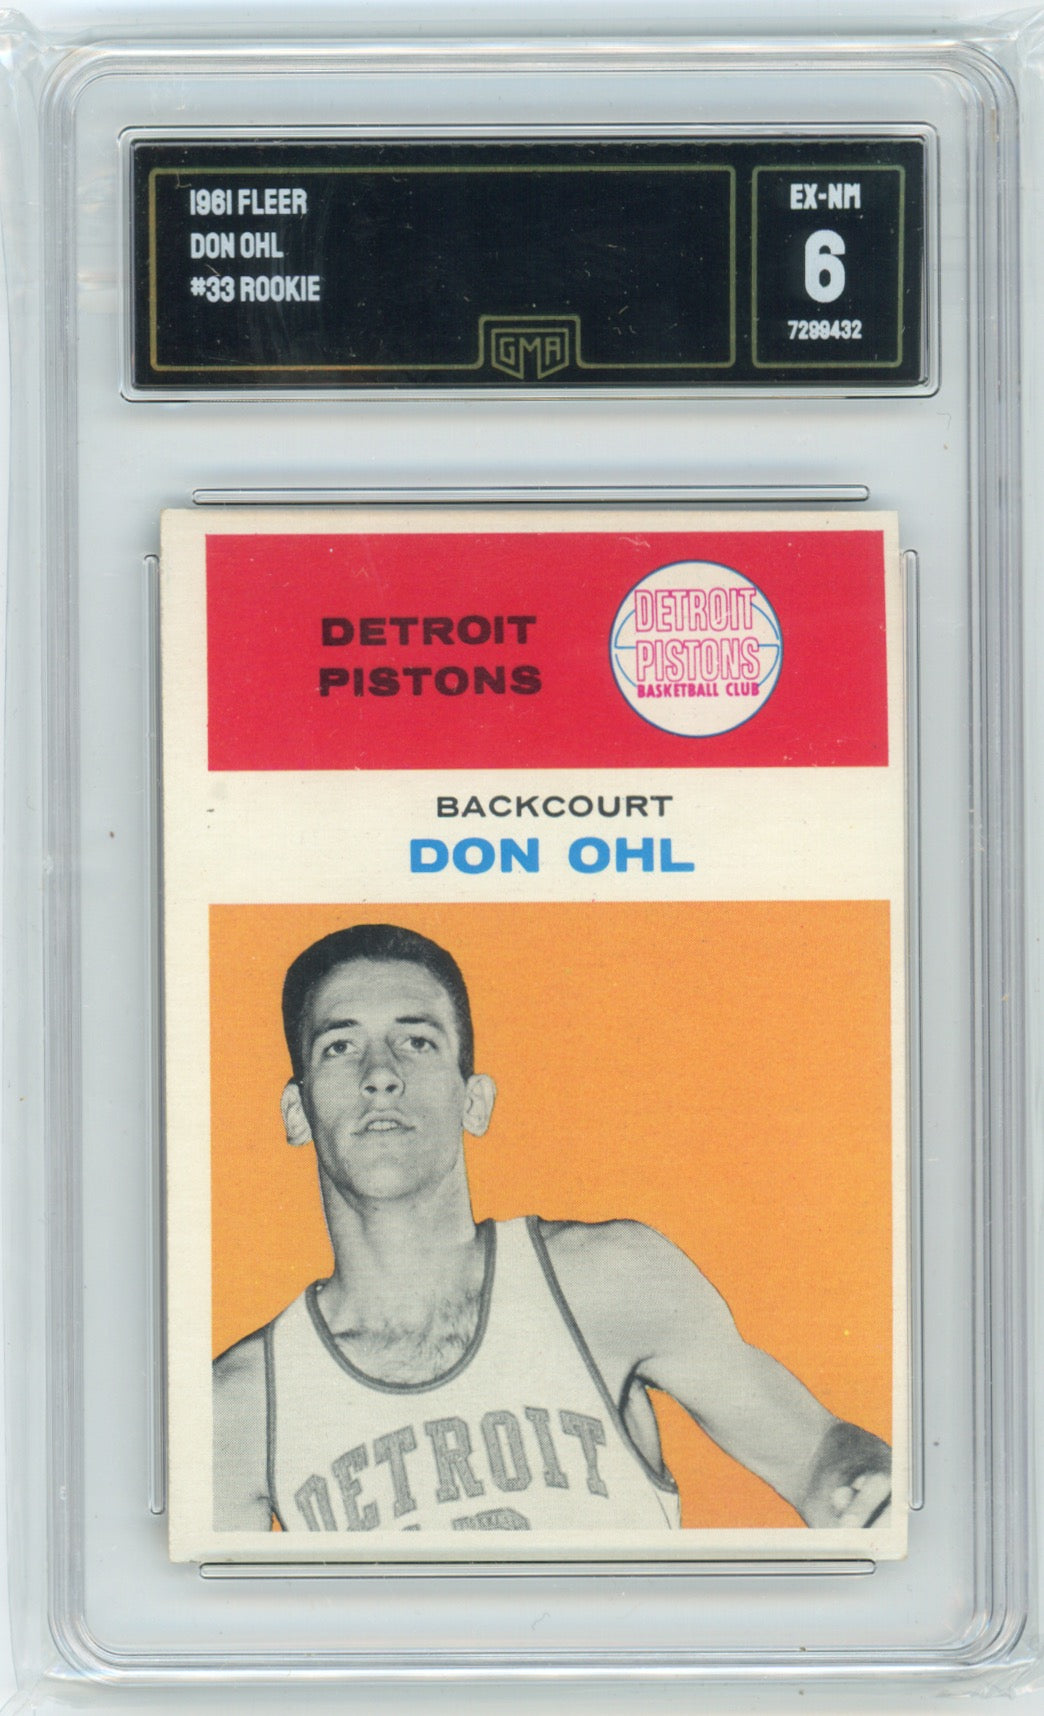 1961 Fleer Don Ohl #33 Rookie GMA 6